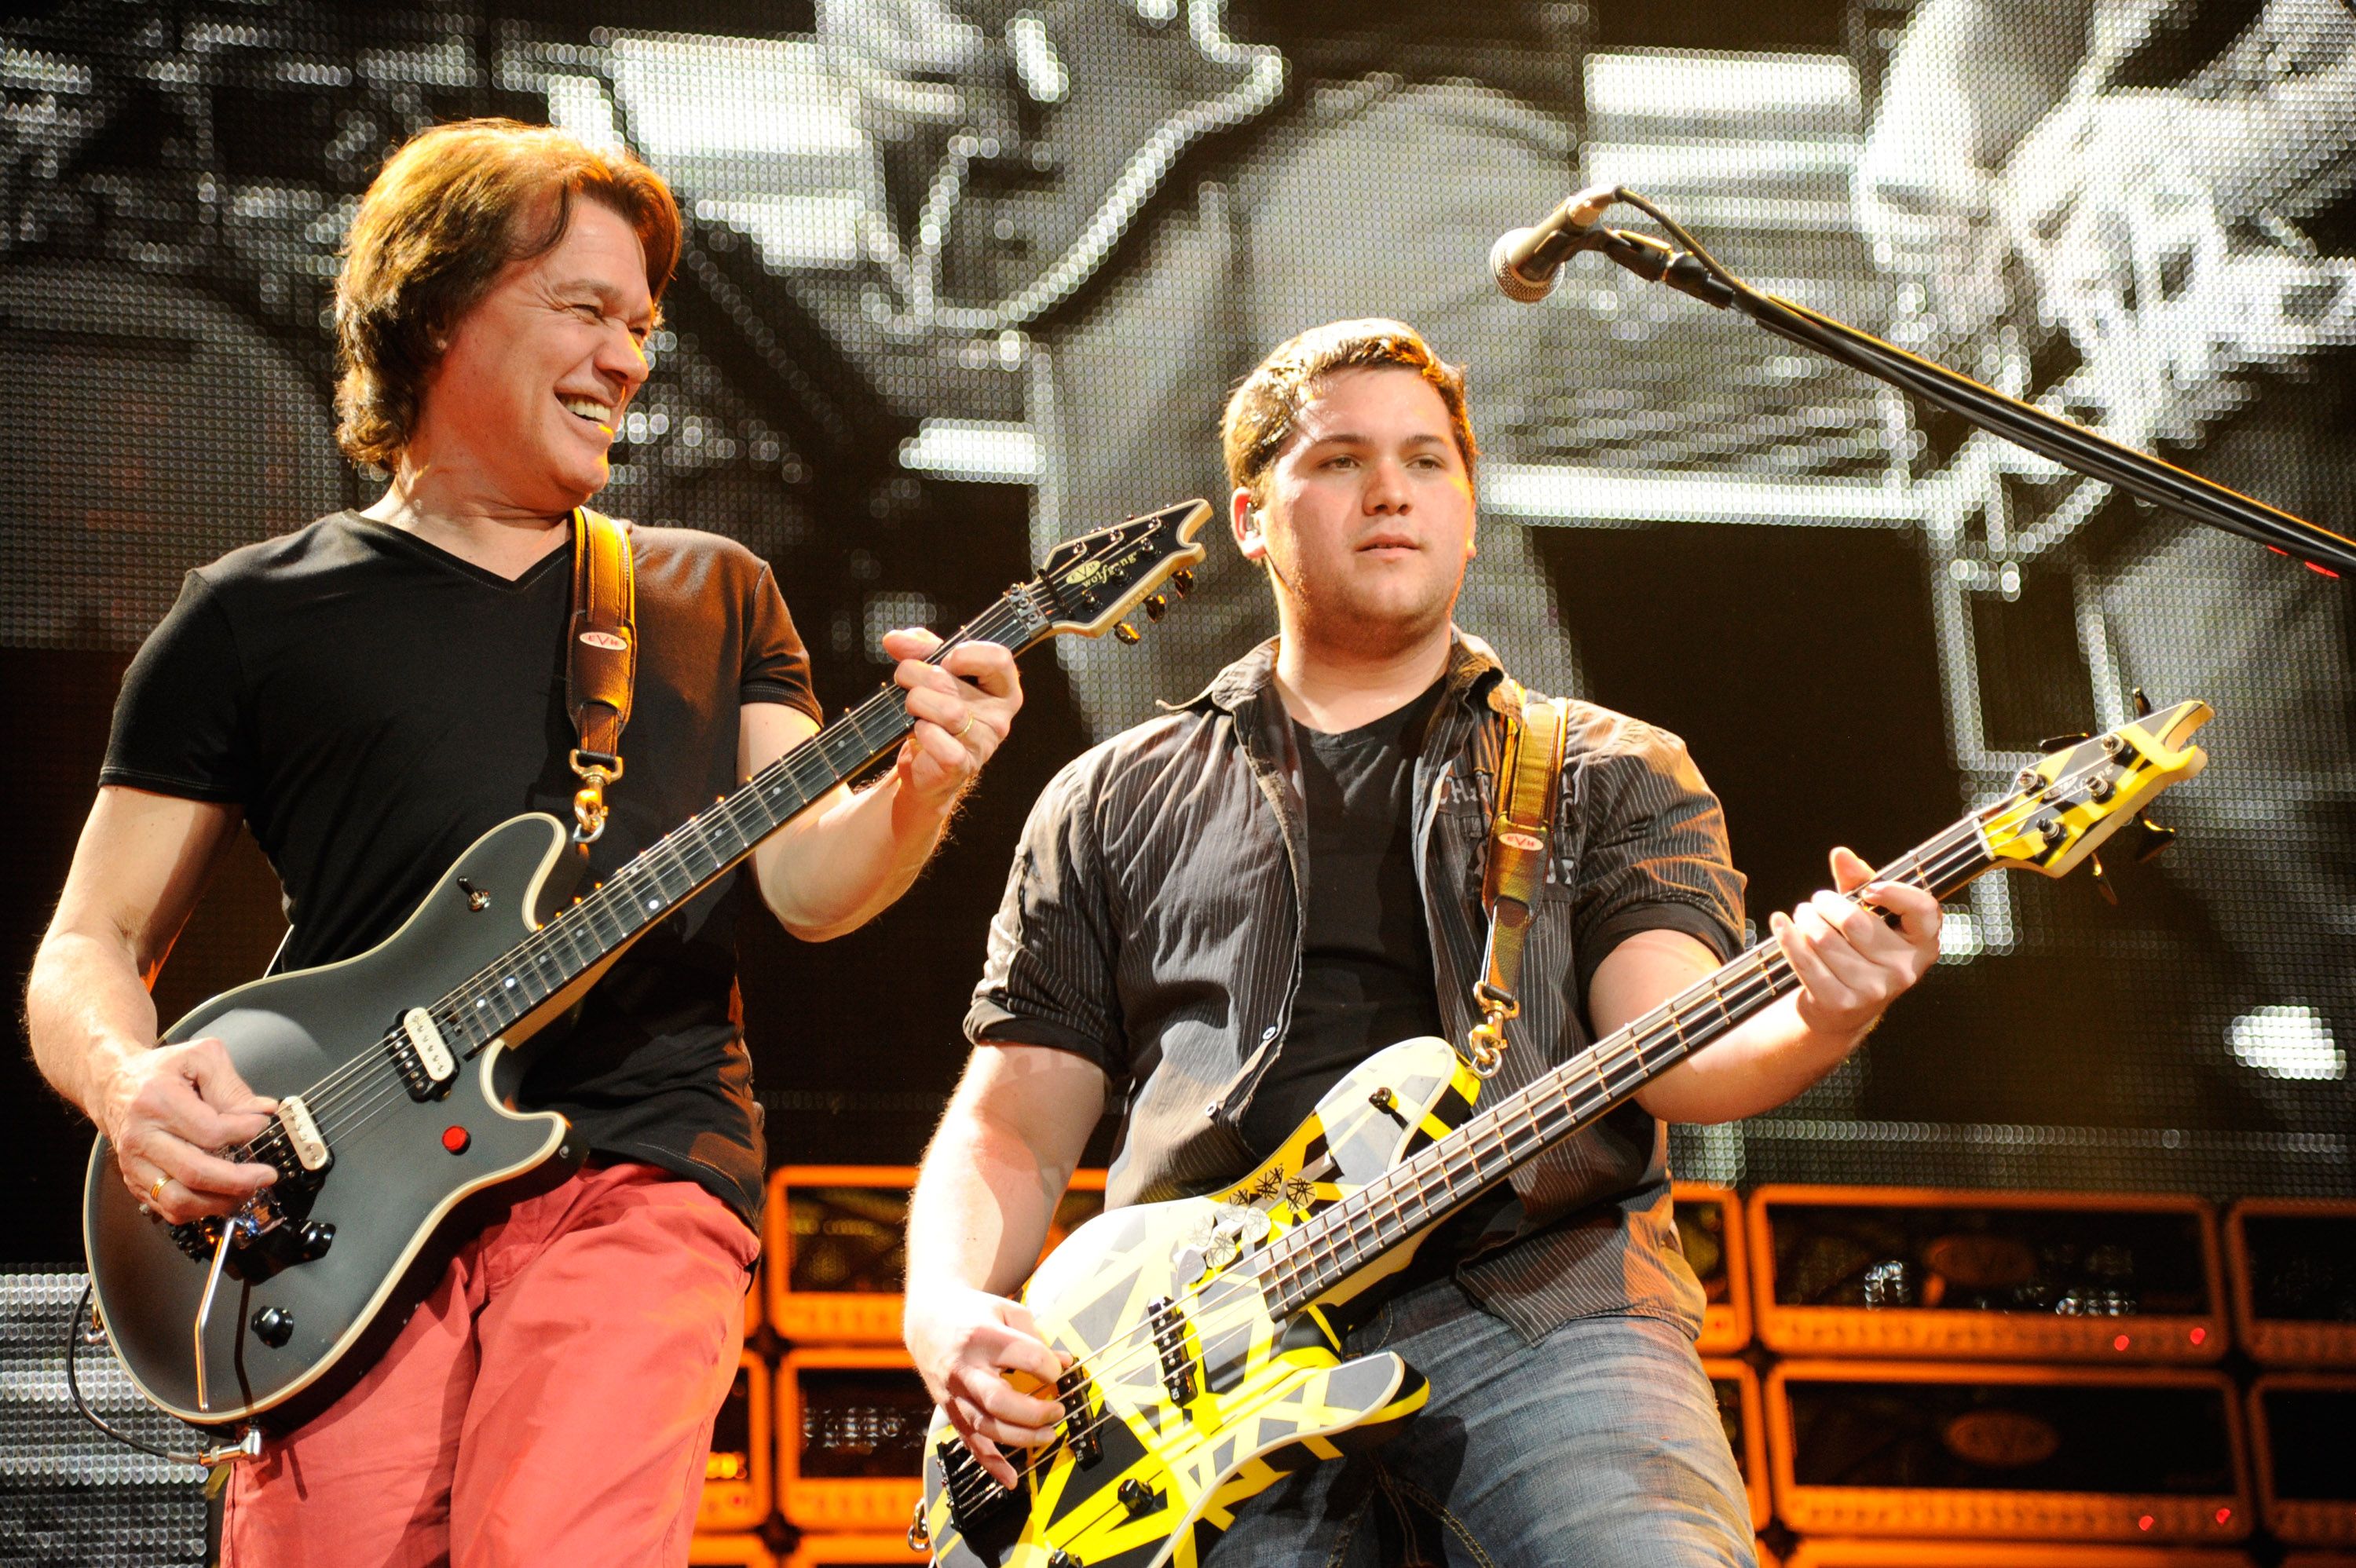 Eddie Van Halen and Wolfgang Van Halen of Van Halen perform during "A Different Kind of Truth" tour at Madison Square Garden on February 28, 2012 in New York City. | Photo: Getty Images.